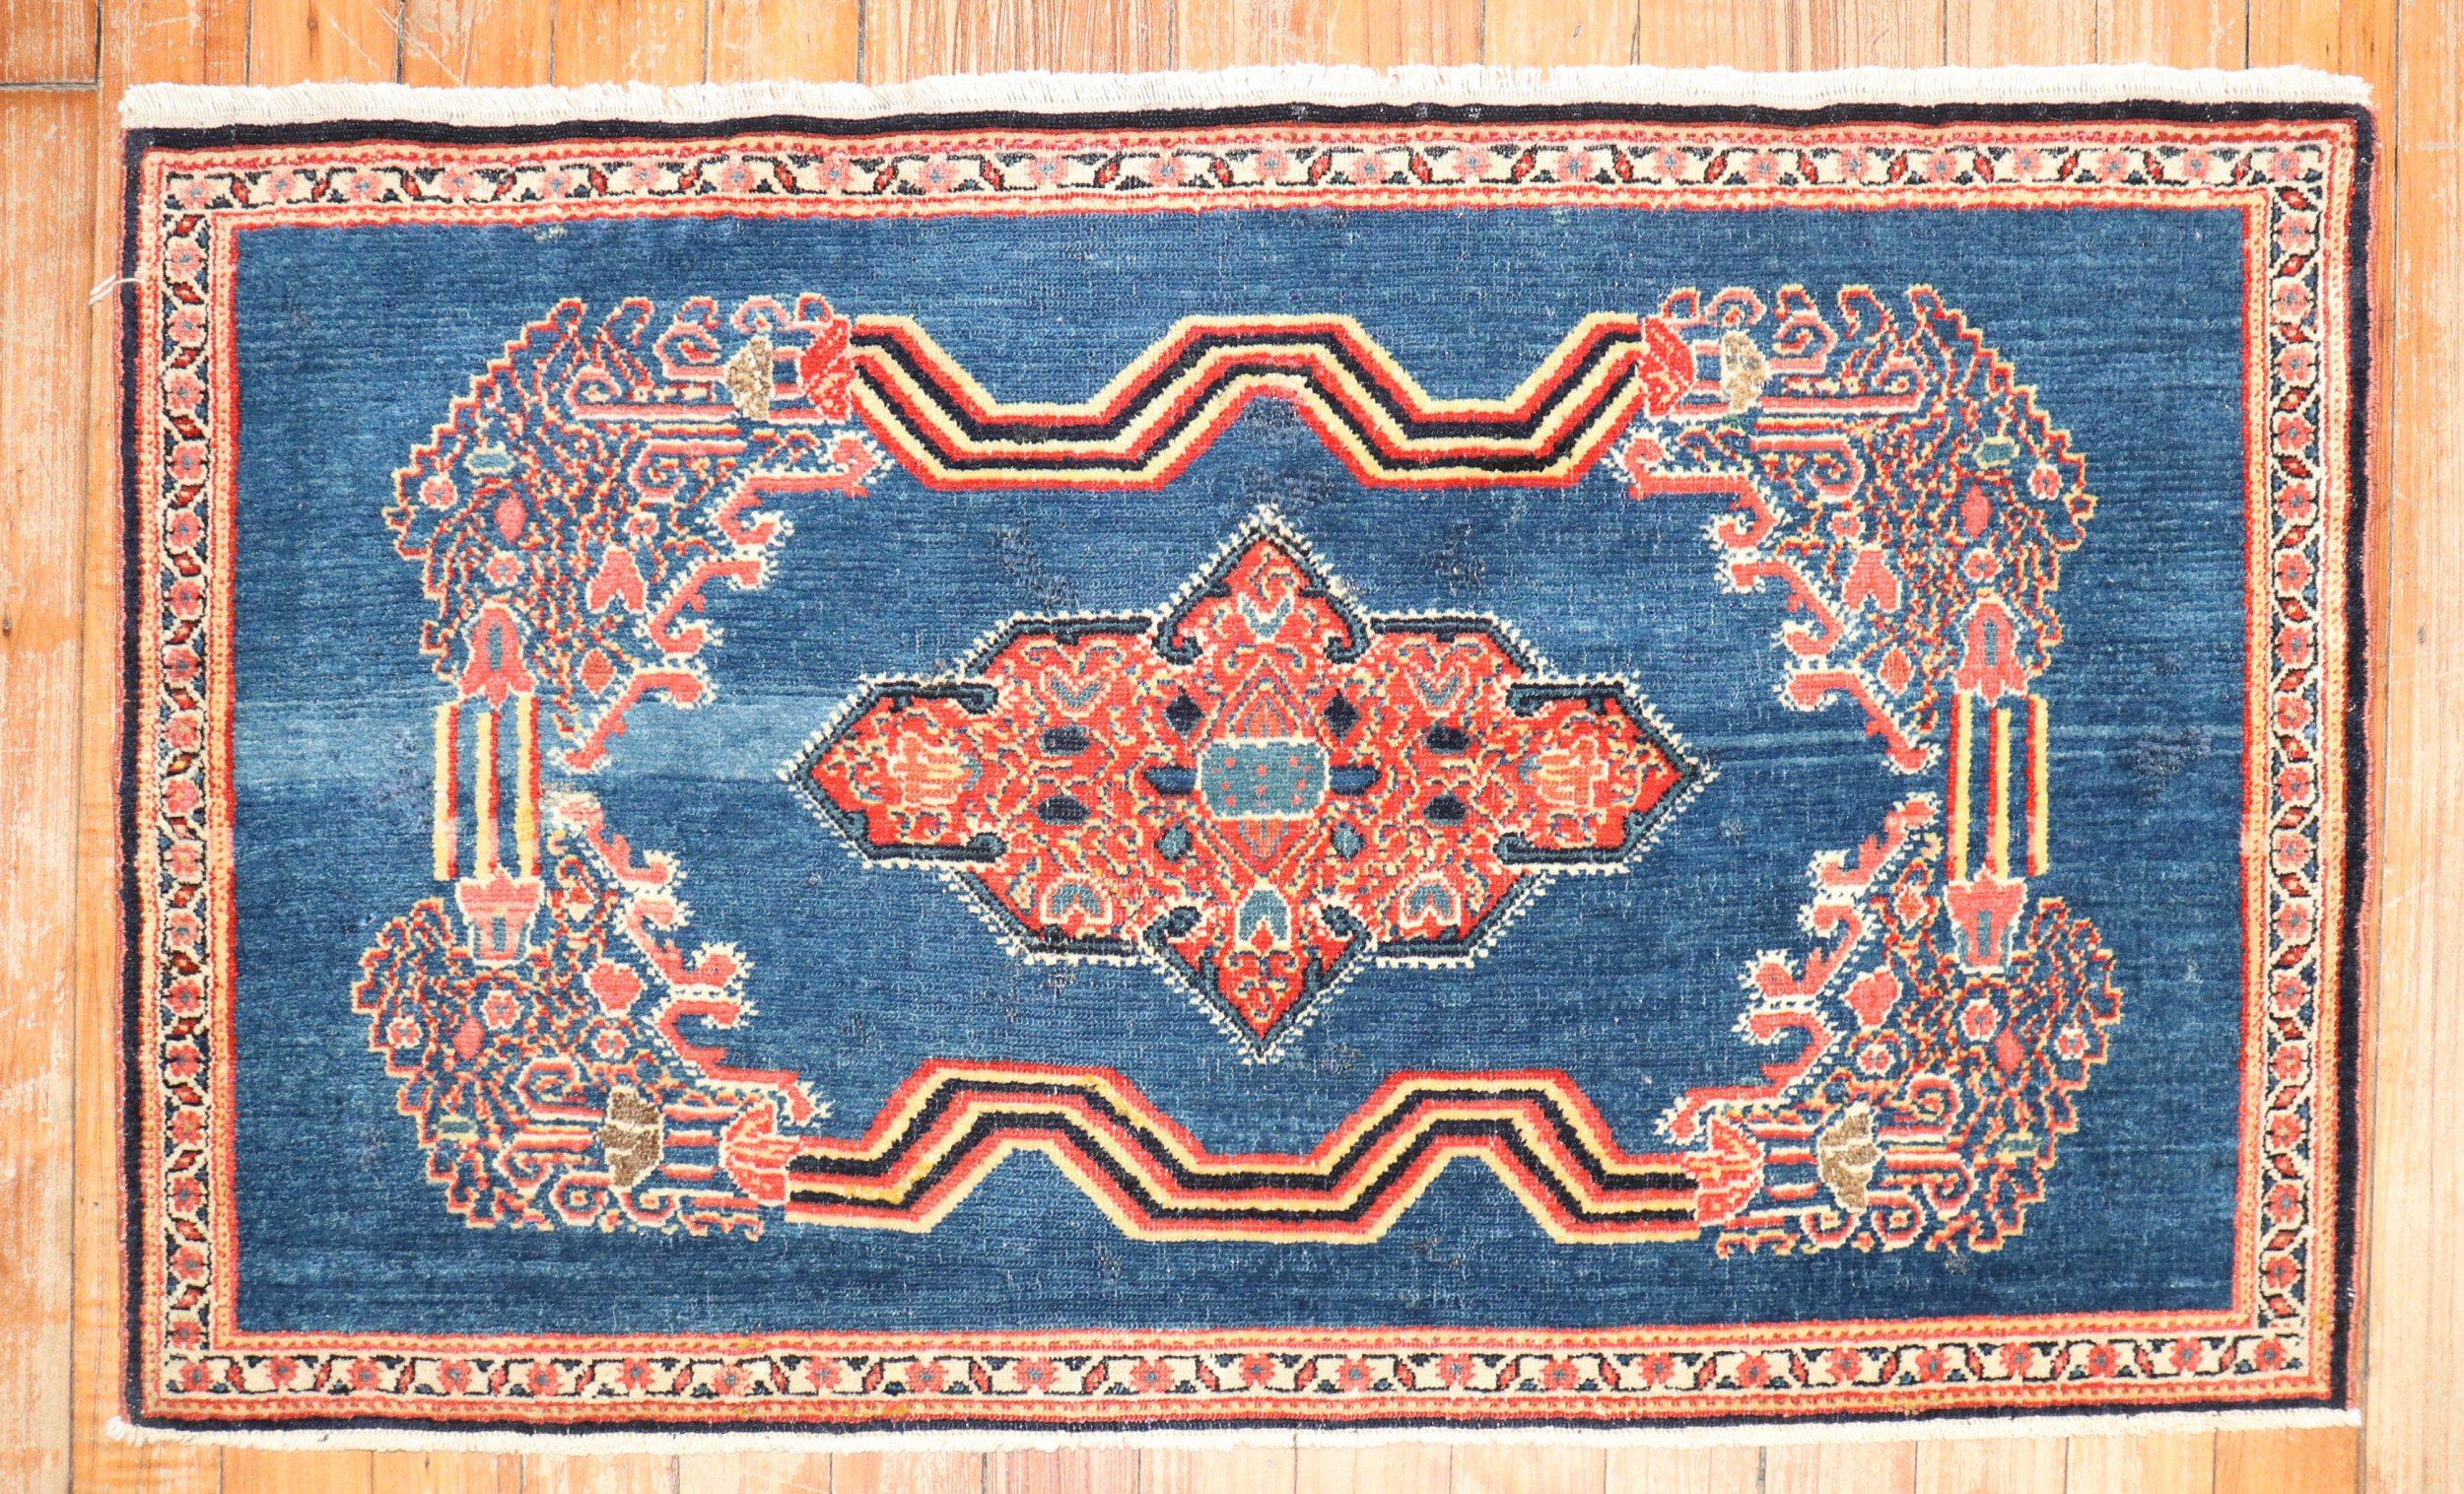 A fine antique Persian Senneh mini size rug from the 1st quarter of the 20th century

Measure: 1'7'' x 2'11'' circa 1920


Antique Senneh rugs are one of the most distinctive of all Persian rugs, even though the designs are often similar to